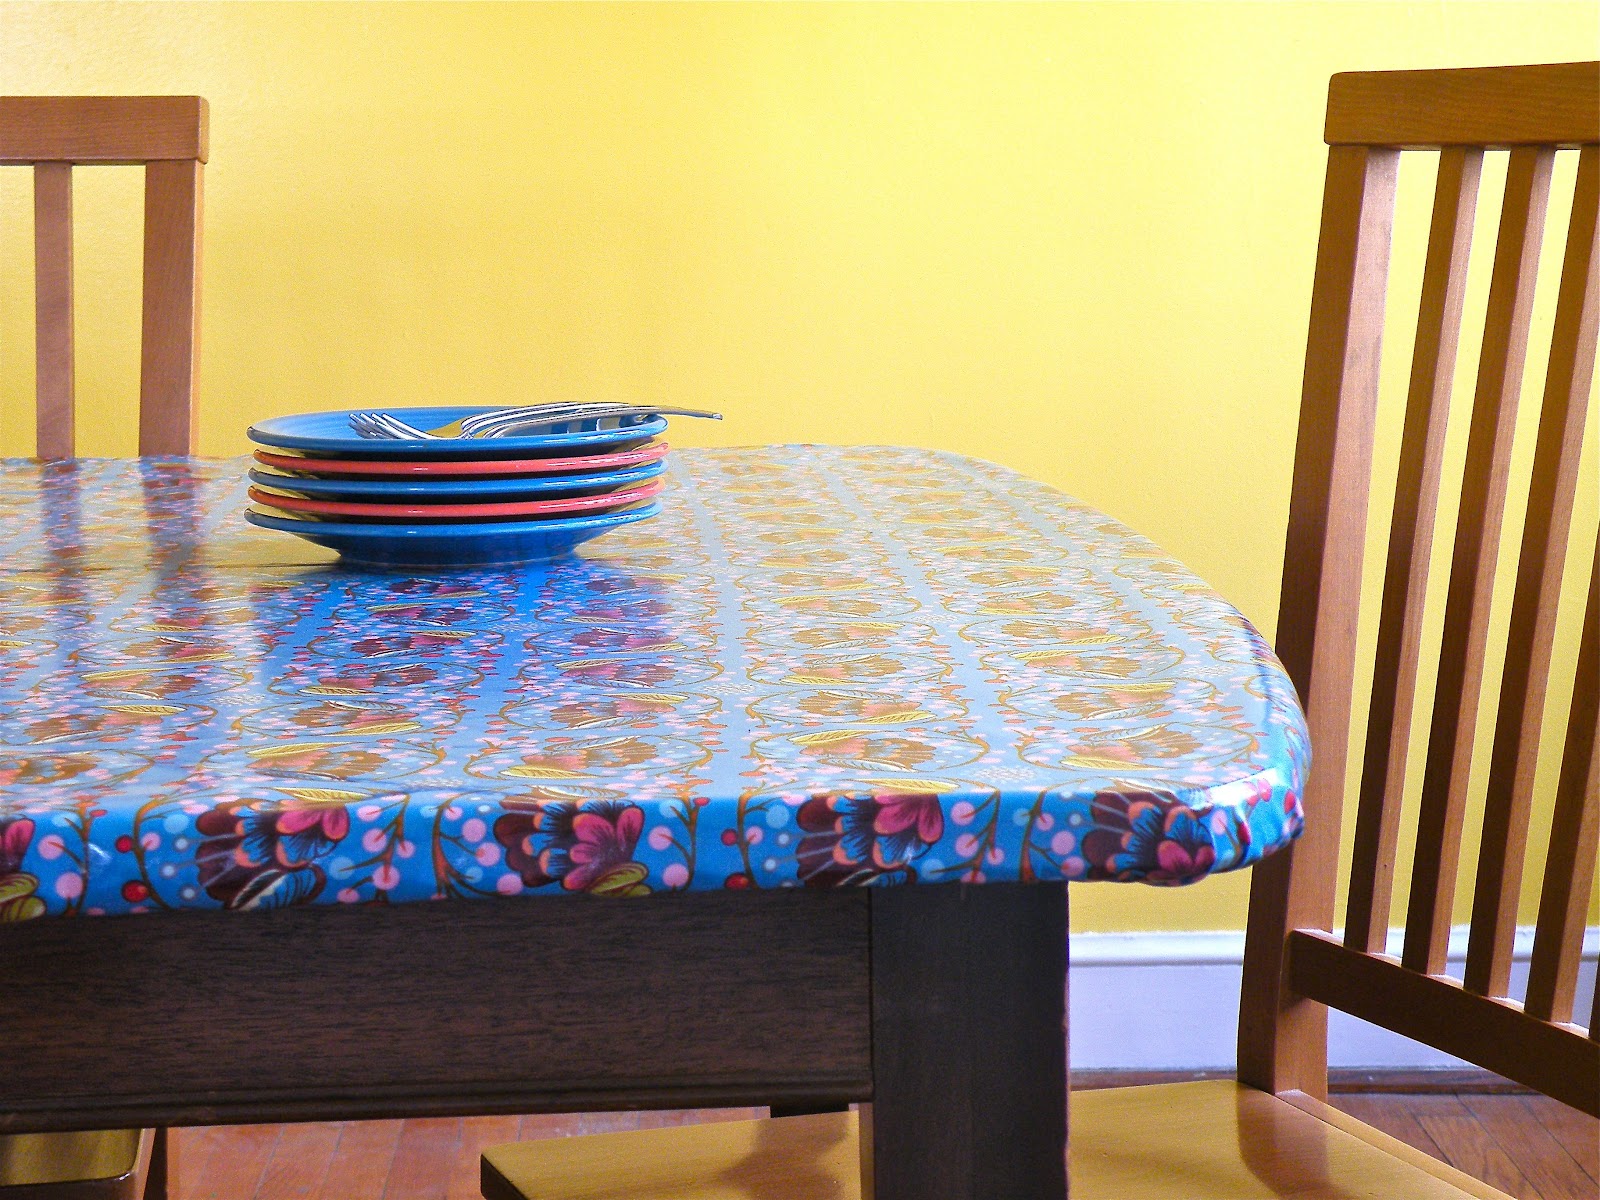 fitted dining room table covers